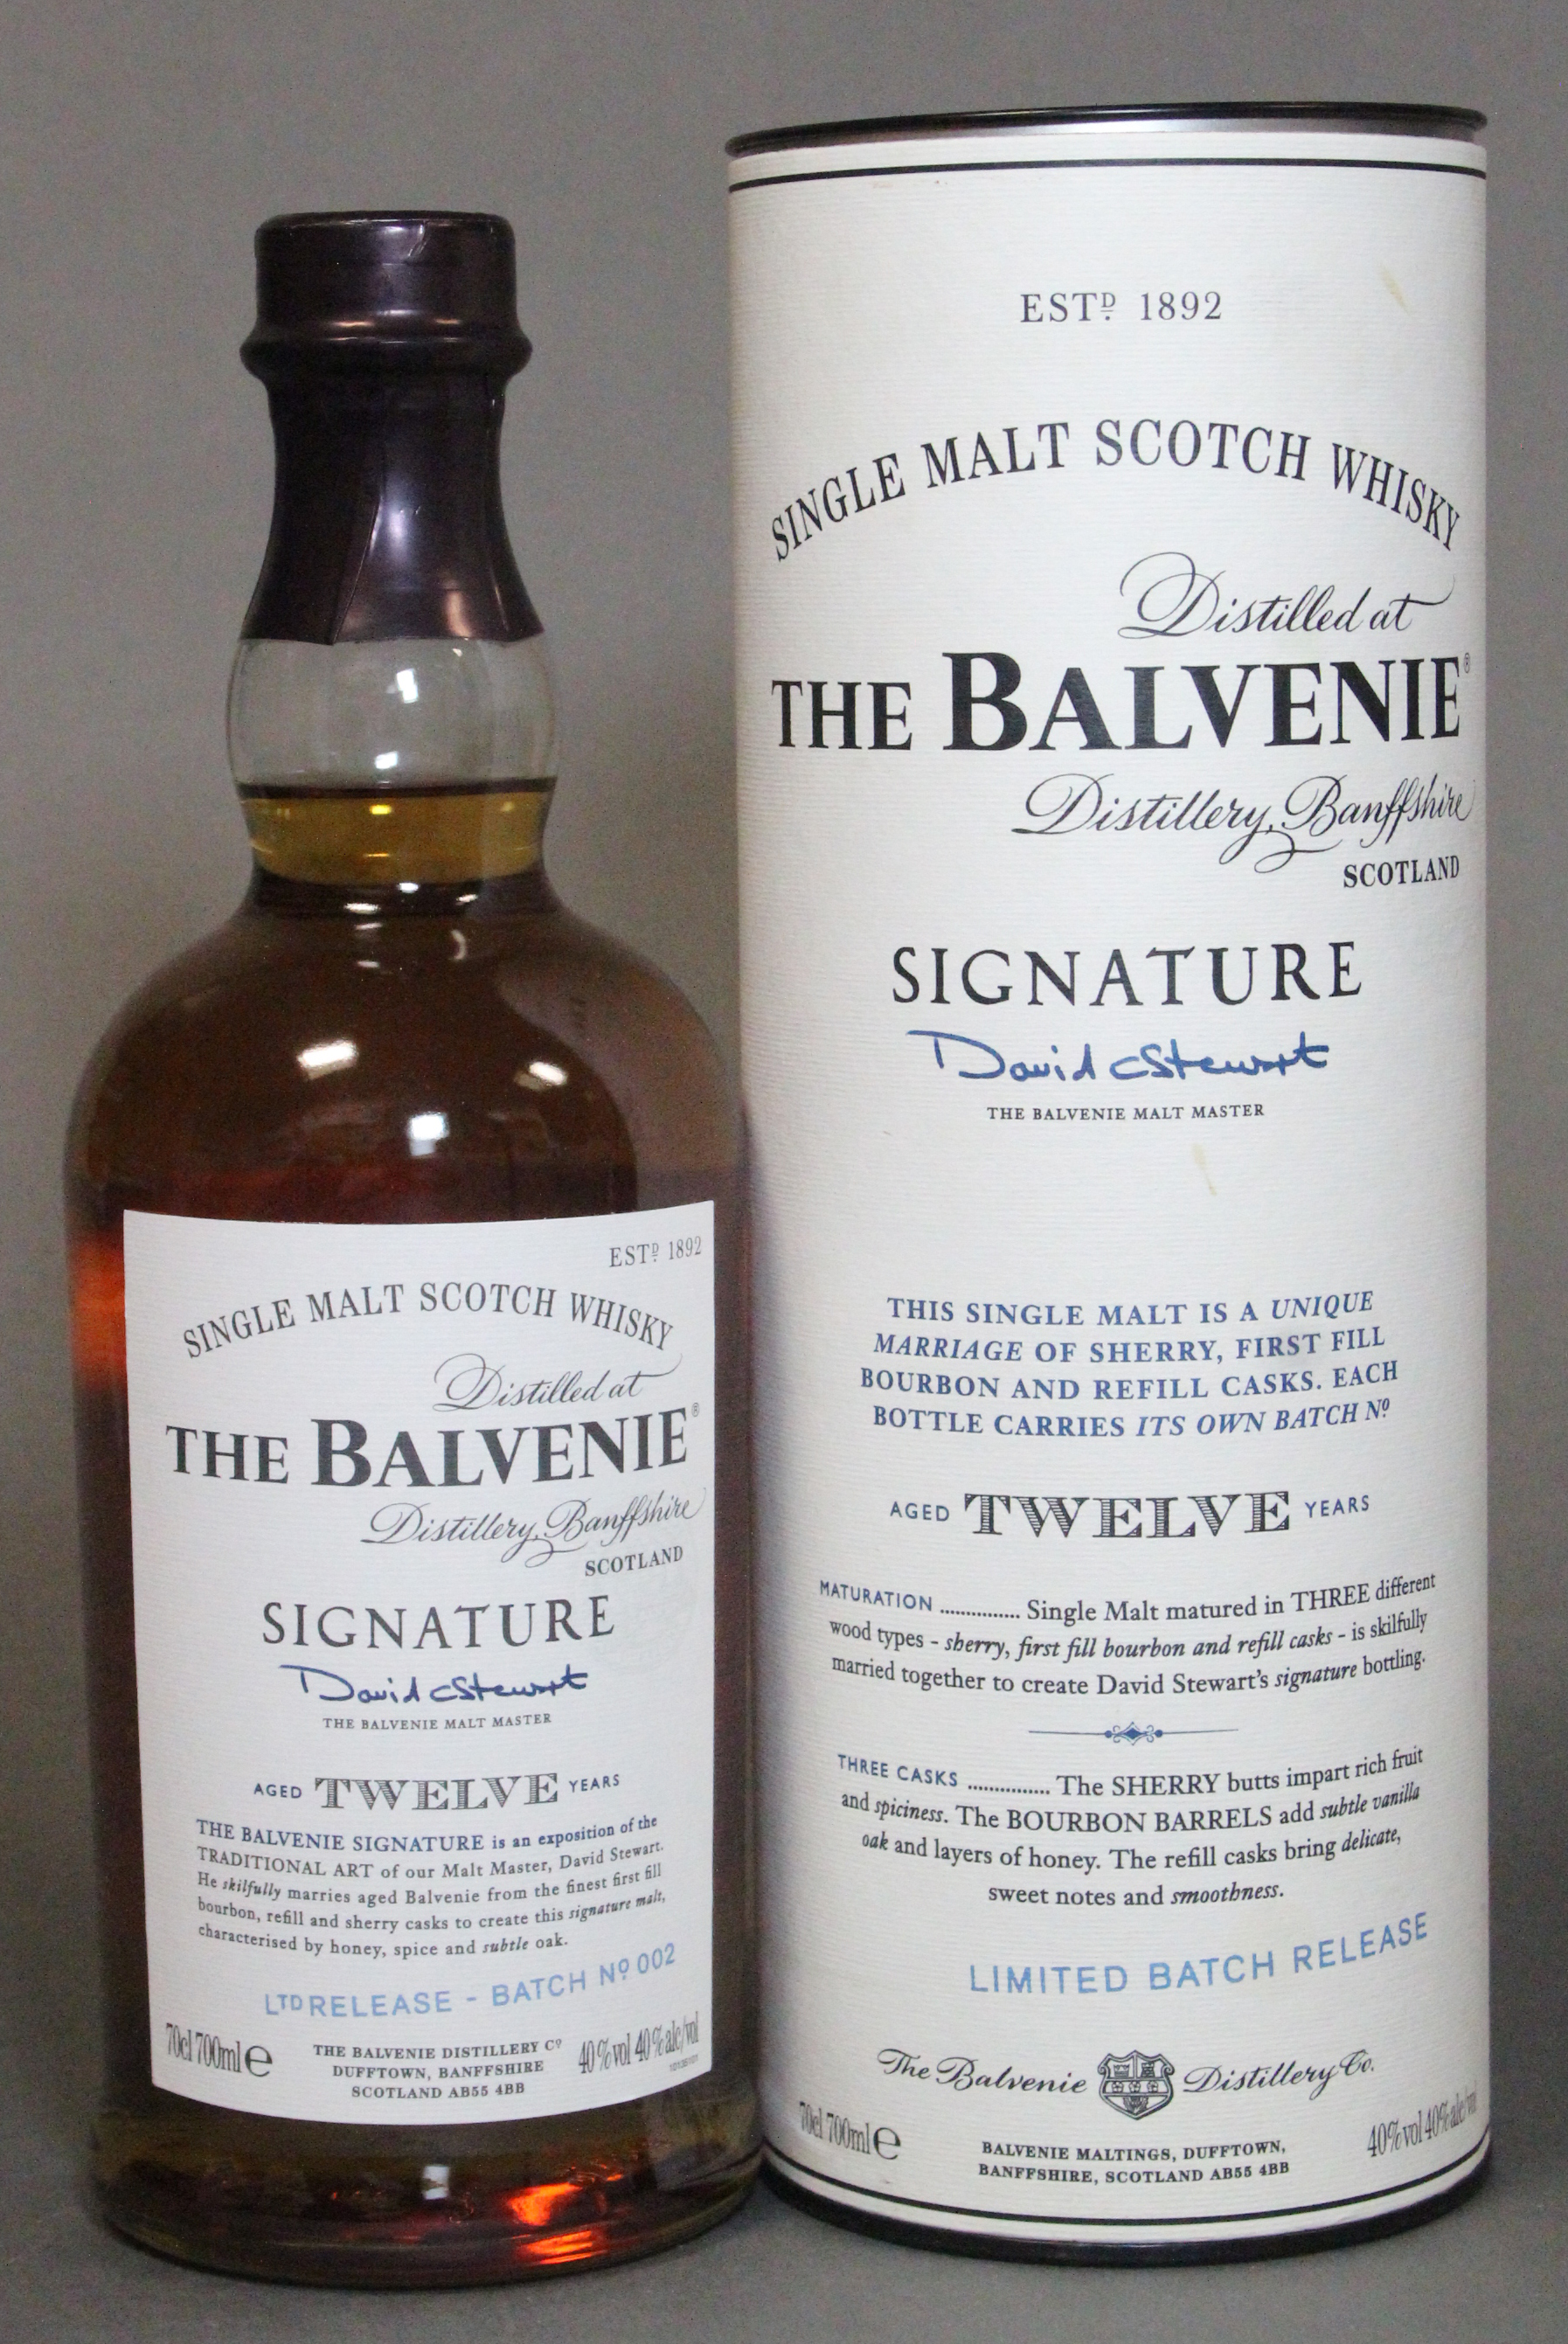 One bottle of “The Balvenie ‘Signature’ 12 Year Old Single Malt Scotch Whisky, Limited Batch Release